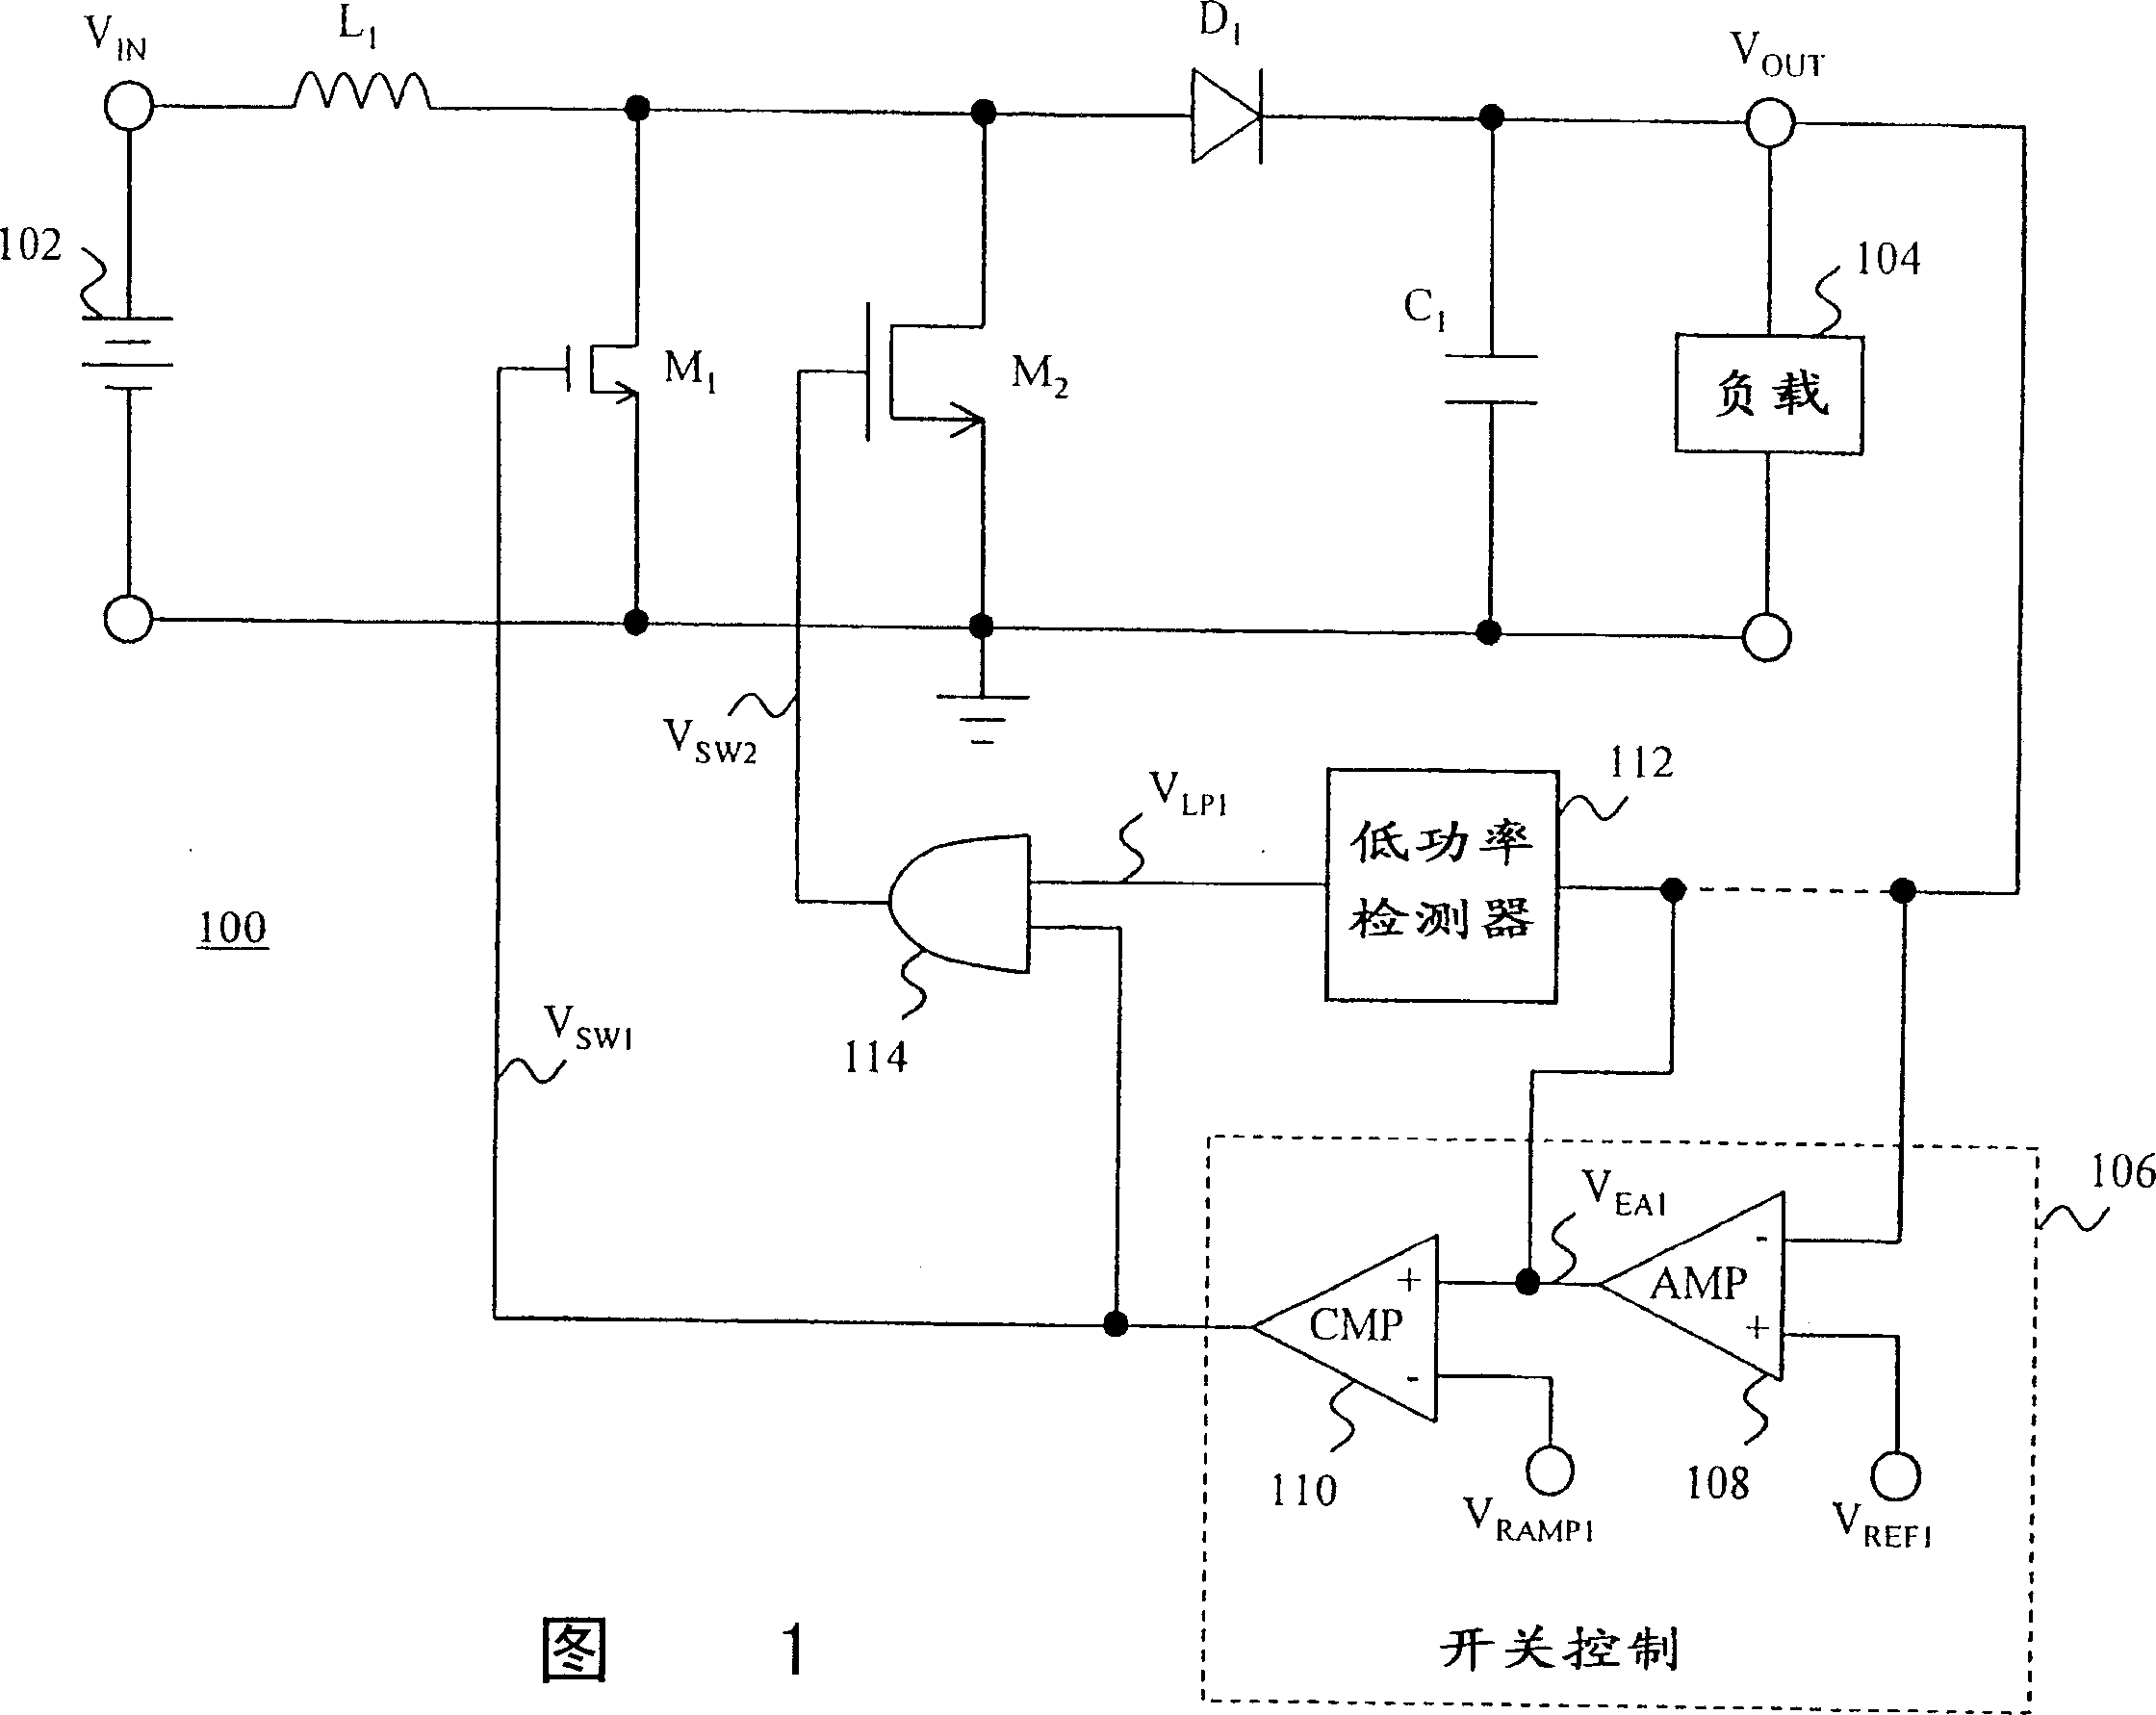 Low power mode and feedback arrangement for switching power converter